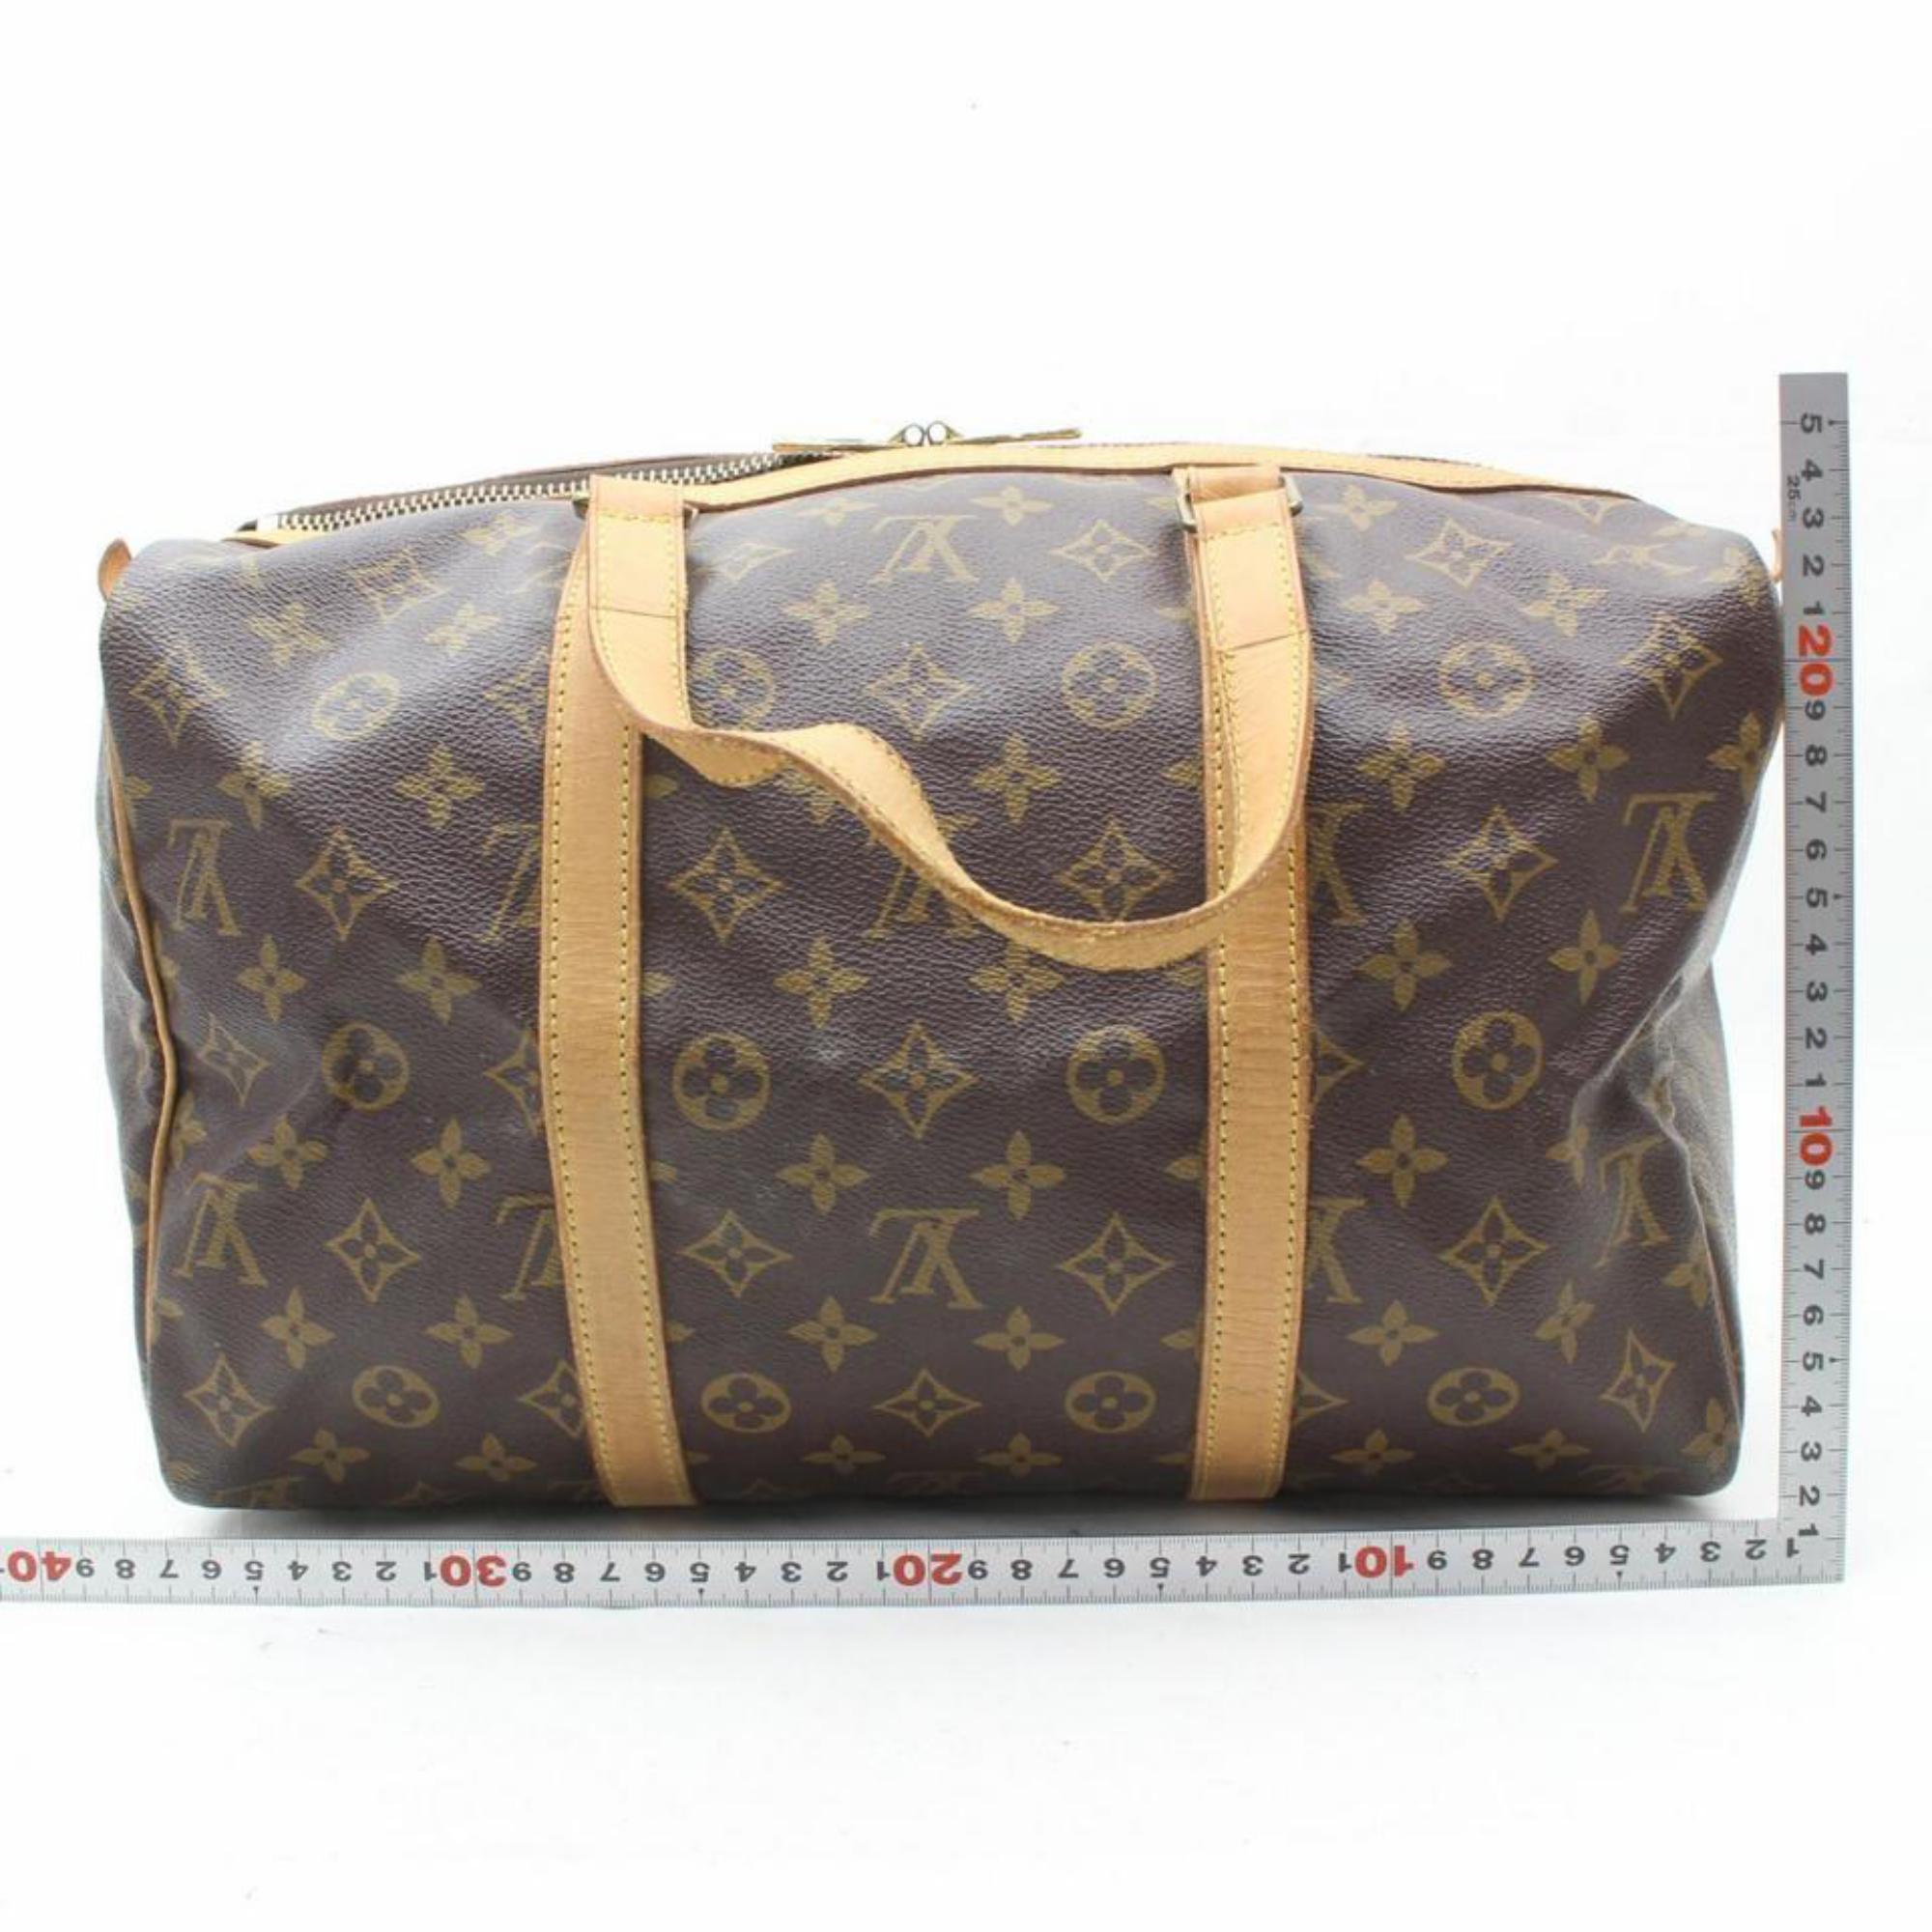 Louis Vuitton Sac Souple 35 Boston Mm 869848 Brown Coated Canvas Satchel In Good Condition For Sale In Forest Hills, NY